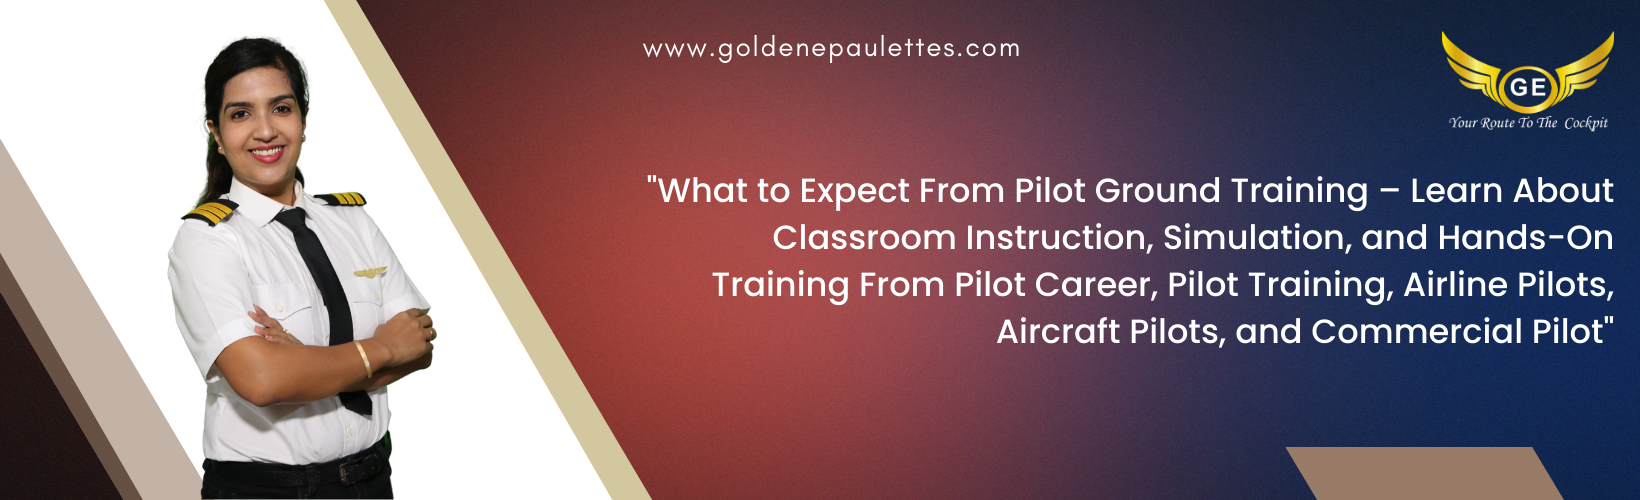 What to Expect From Pilot Ground Training – This article will provide a comprehensive overview of what to expect from pilot ground training, including classroom instruction, simulation, and hands